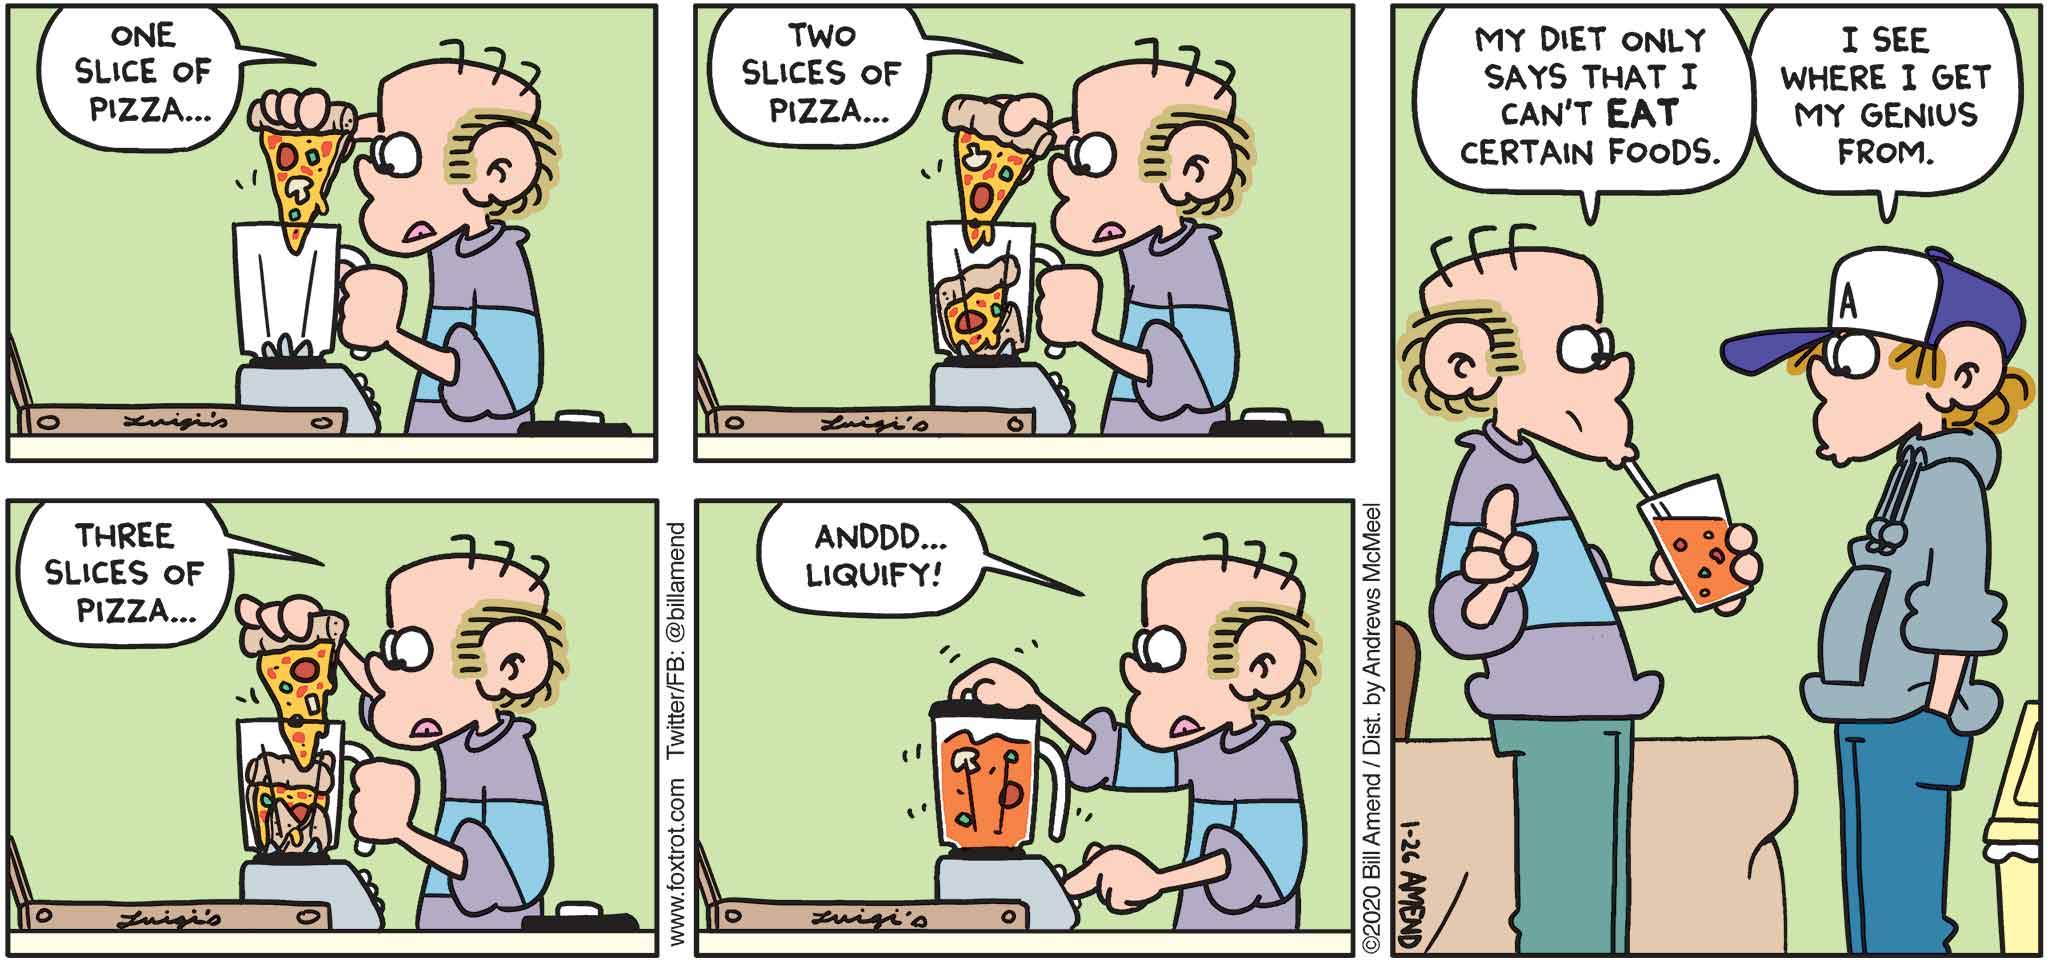 FoxTrot by Bill Amend - "Blendo Italiano" published January 26, 2020 - Roger: One slice of pizza... Two slices of pizza... Three slices of pizza... Anddd... liquify! My diet only says that I can't eat certain food. Peter: I see where I get my genius from.